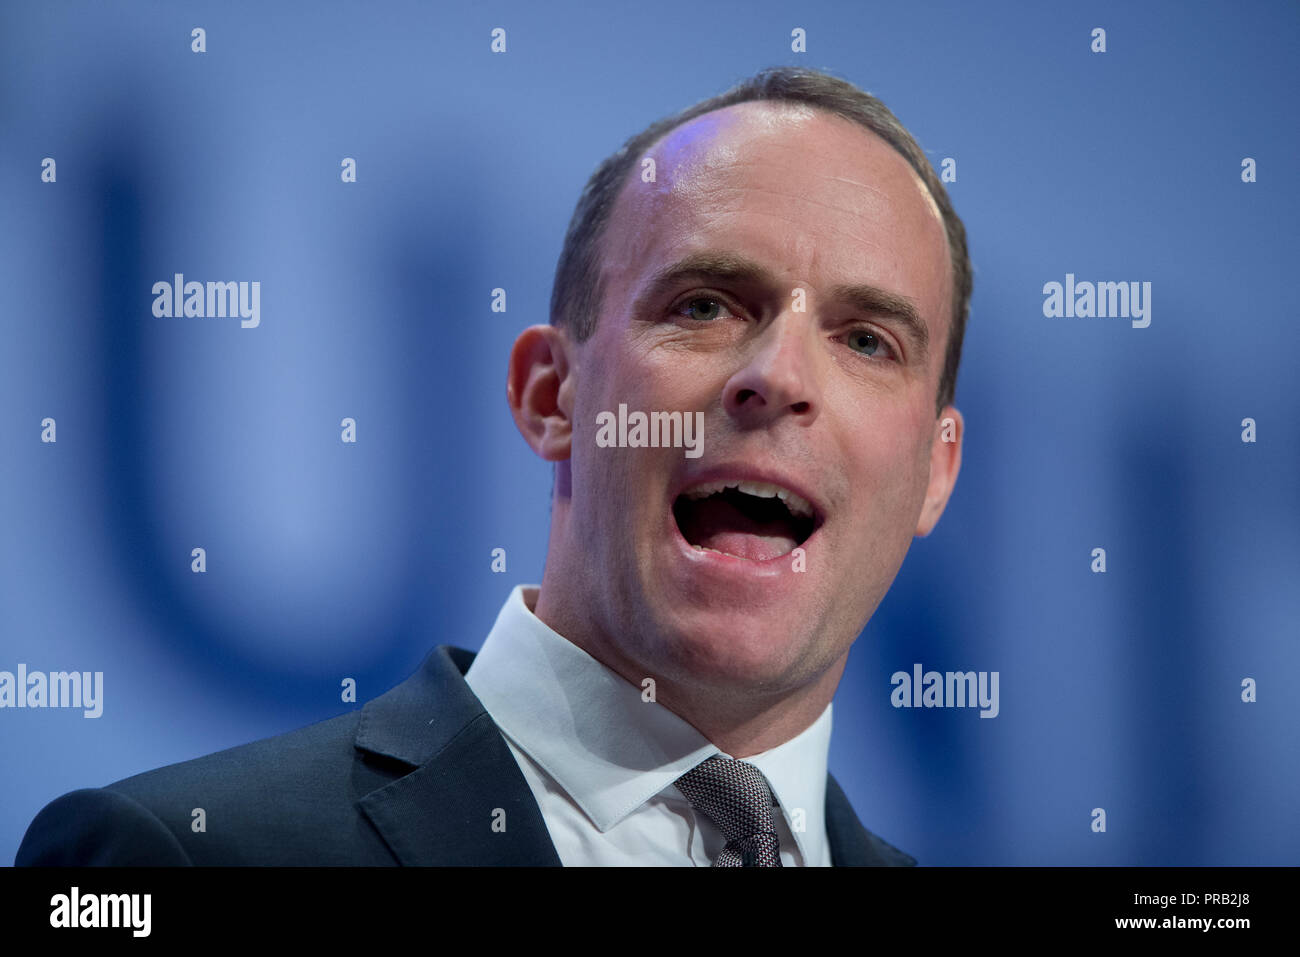 Birmingham, UK. 1st October 2018. Dominic Raab, Secretary of State for Exiting the European Union and Conservative MP for Esher and Walton, speaks at the Conservative Party Conference in Birmingham. © Russell Hart/Alamy Live News. Stock Photo